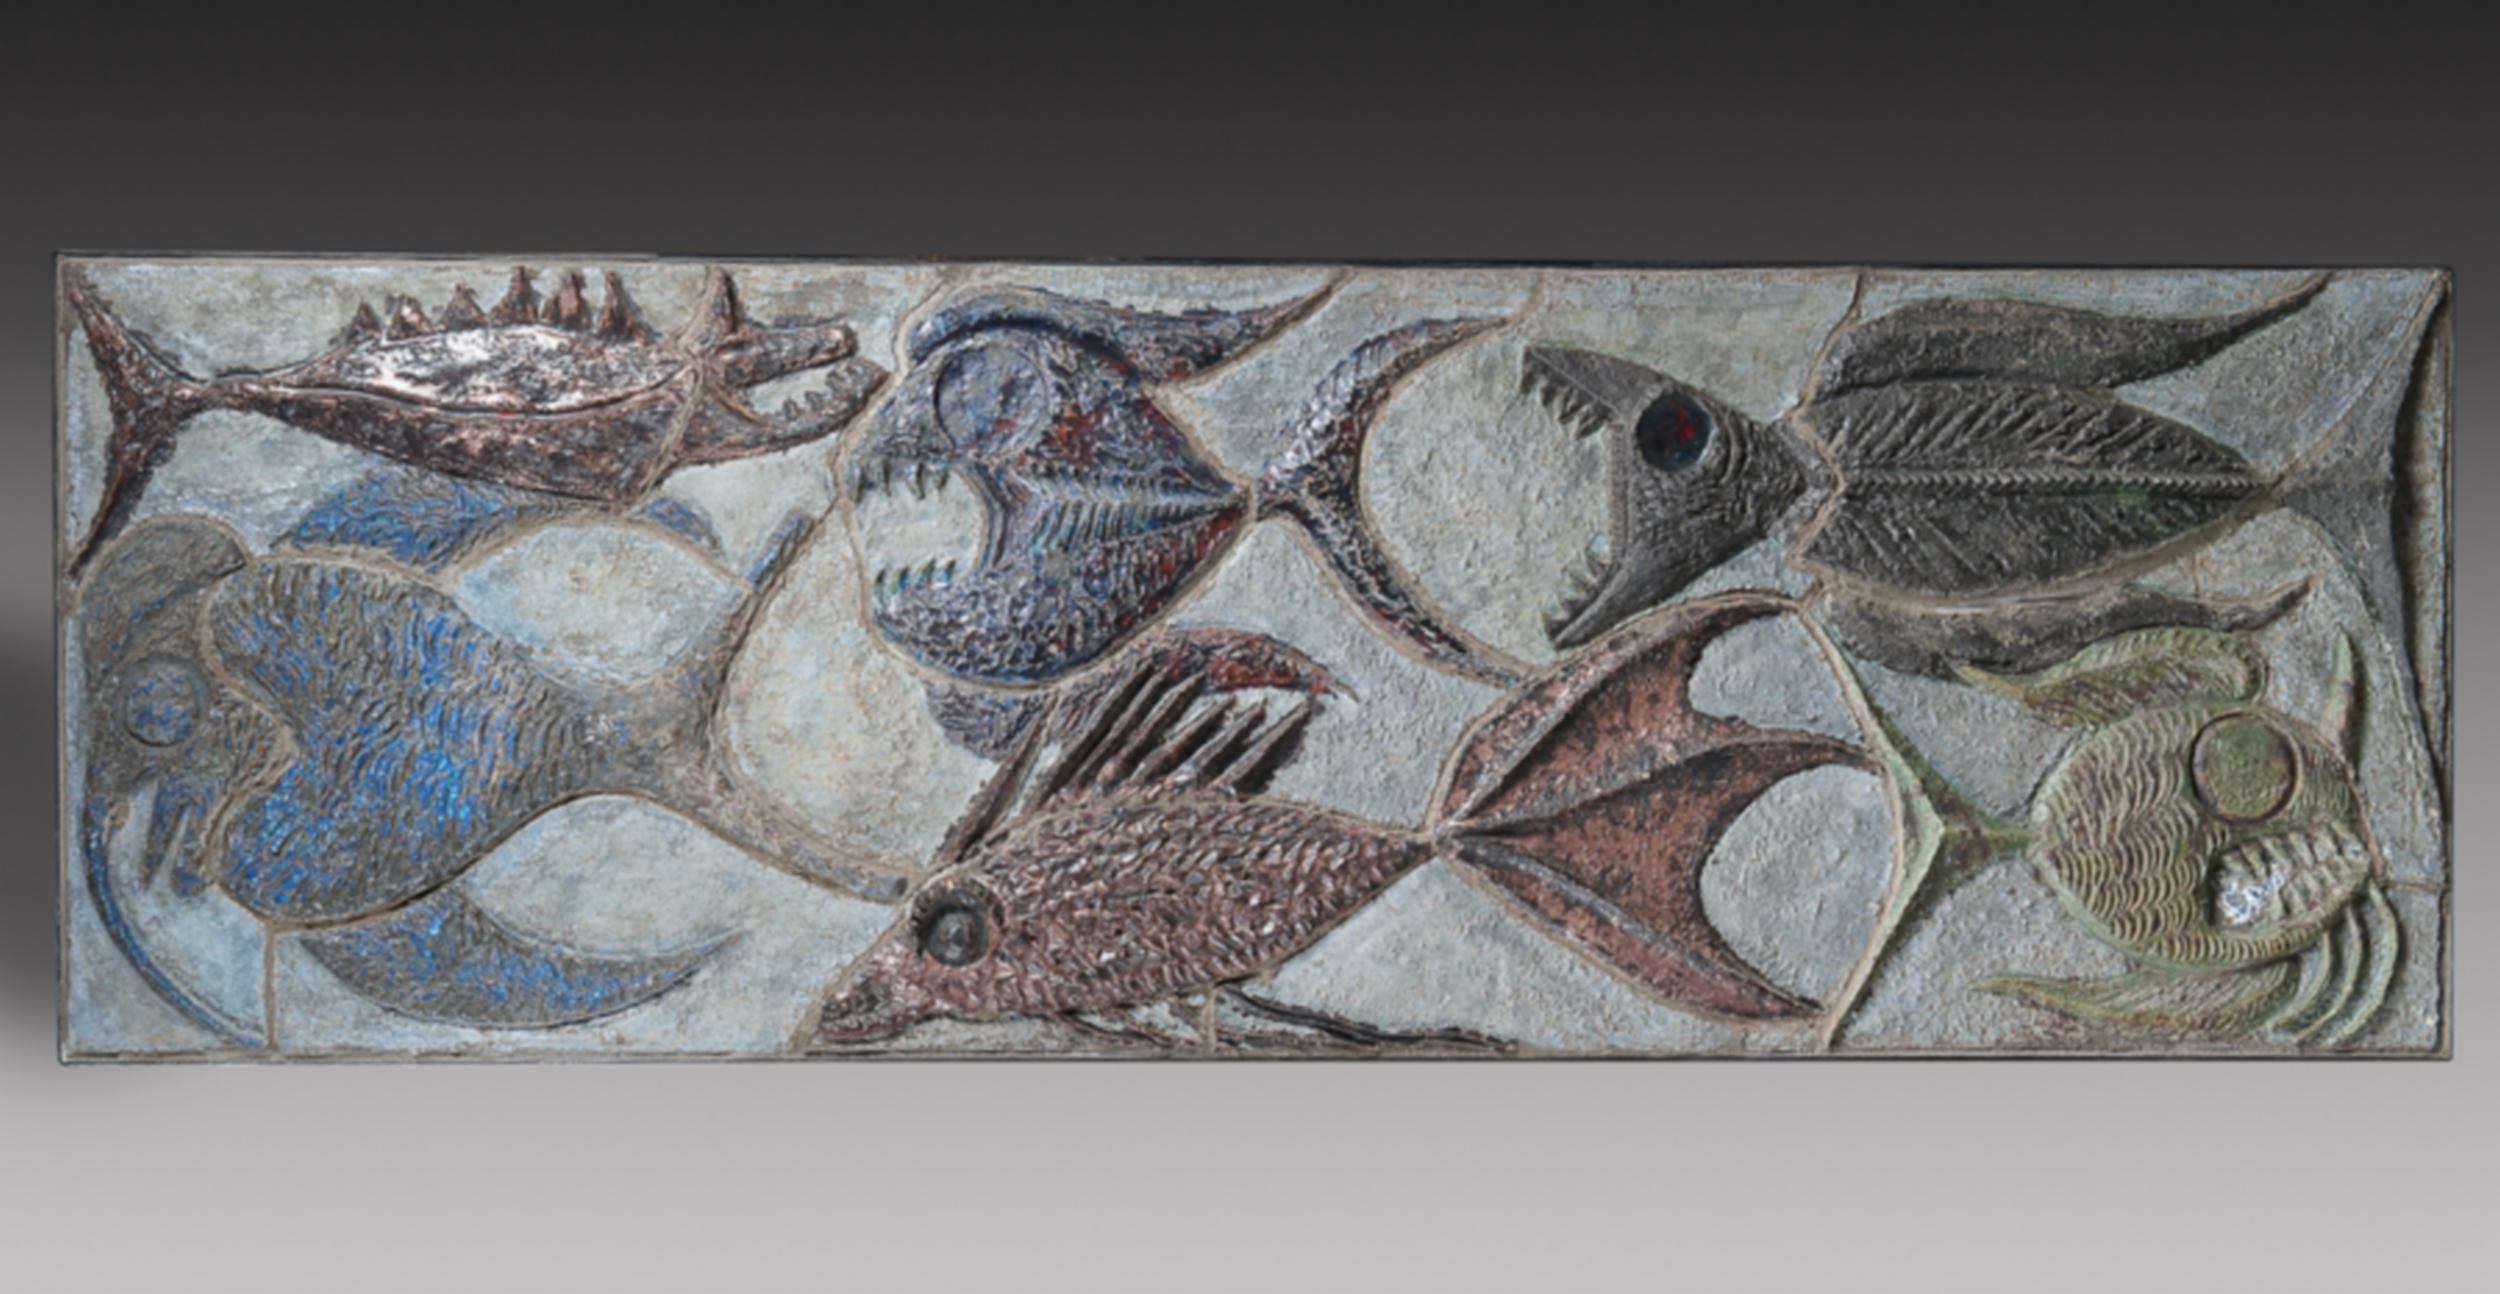 Large glazed ceramic decorative panel with fish in relief on a blue background.
Signed and dated 1969 on the reverse. It is supported by a wooden panel and mounted in an original iron frame.